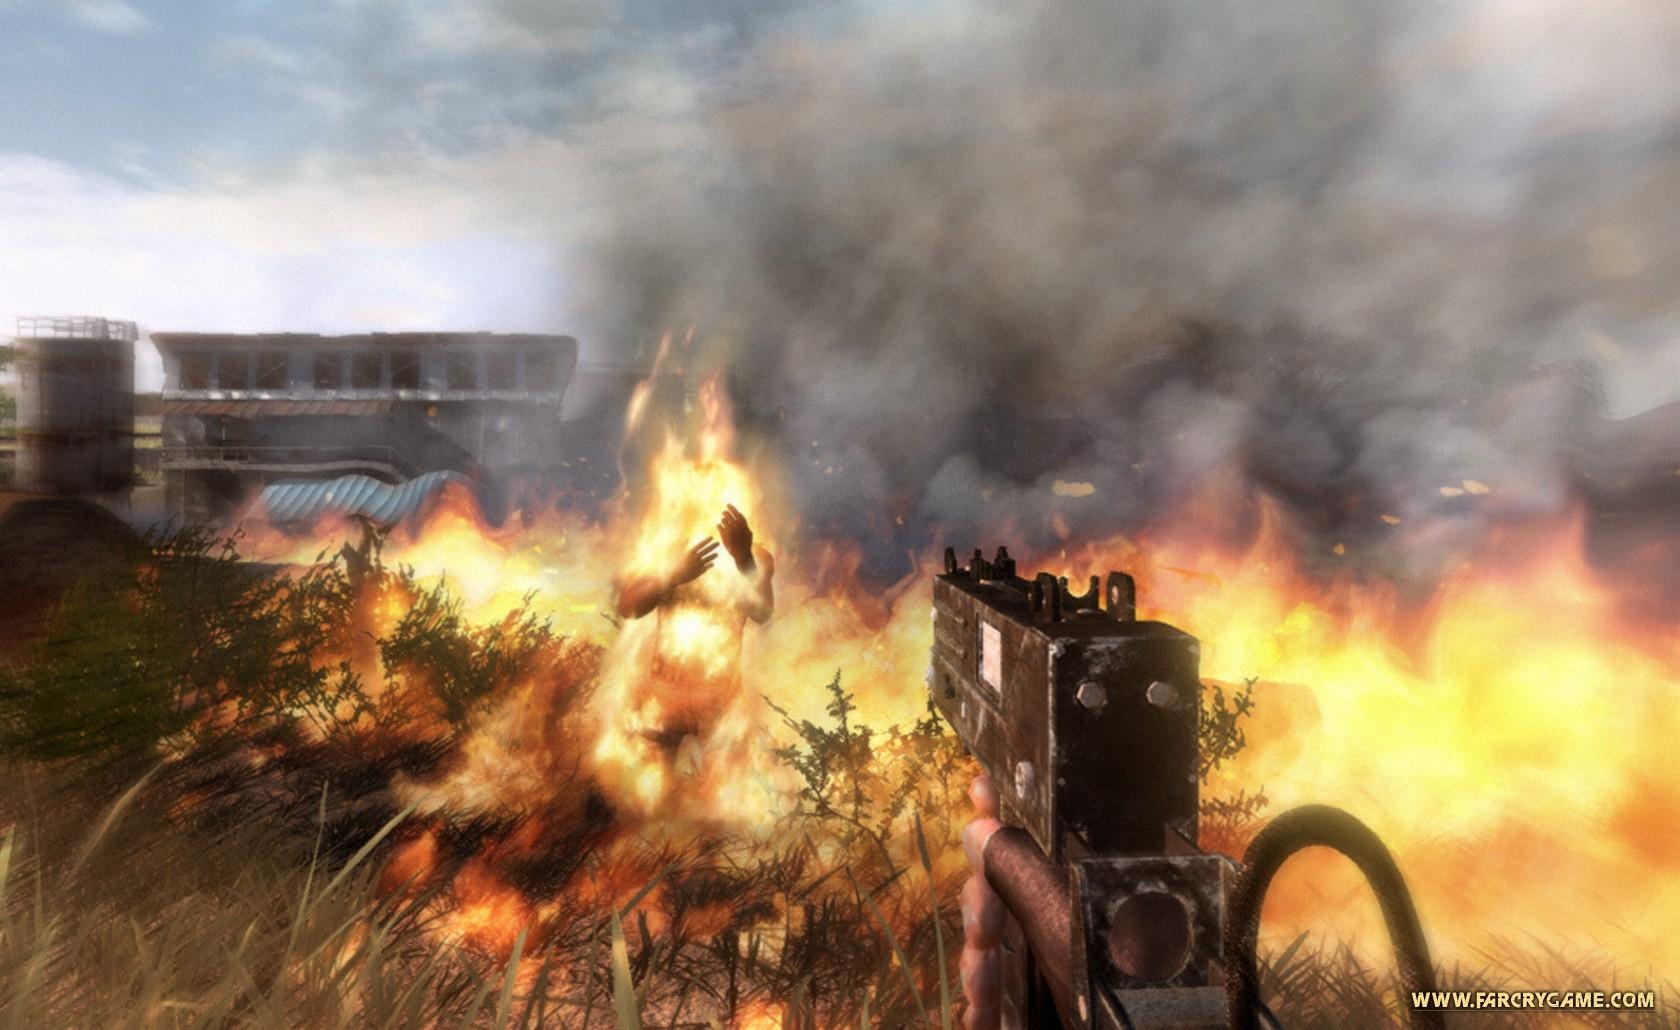 Thoughts: Far Cry 2.  The Scientific Gamer